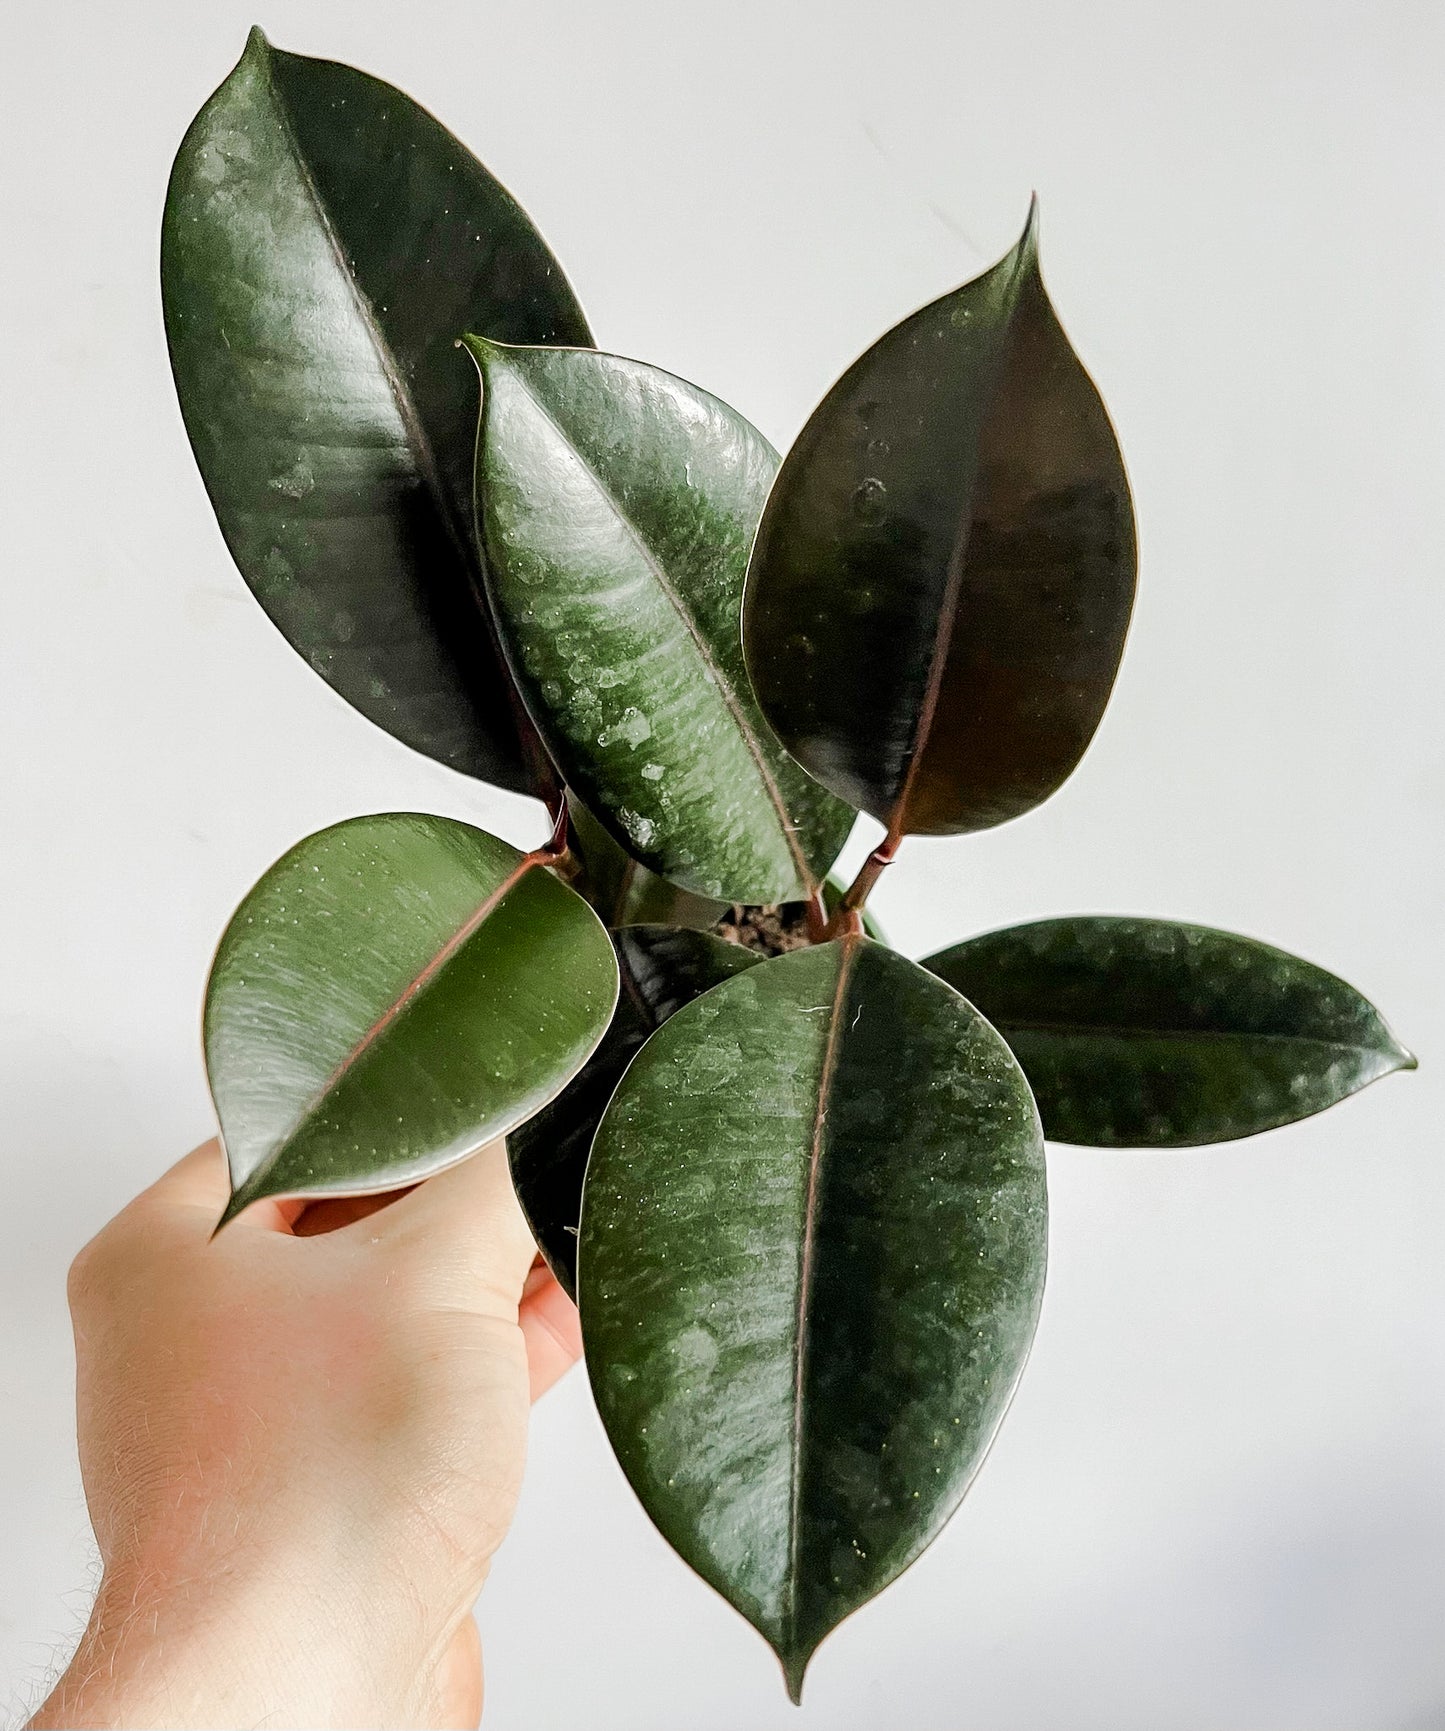 Ficus Elastica 'Burgundy' Rubber Plant - Small Indoor Tree with Shiny Dark Leaves- Tropical Rubber Tree Plant